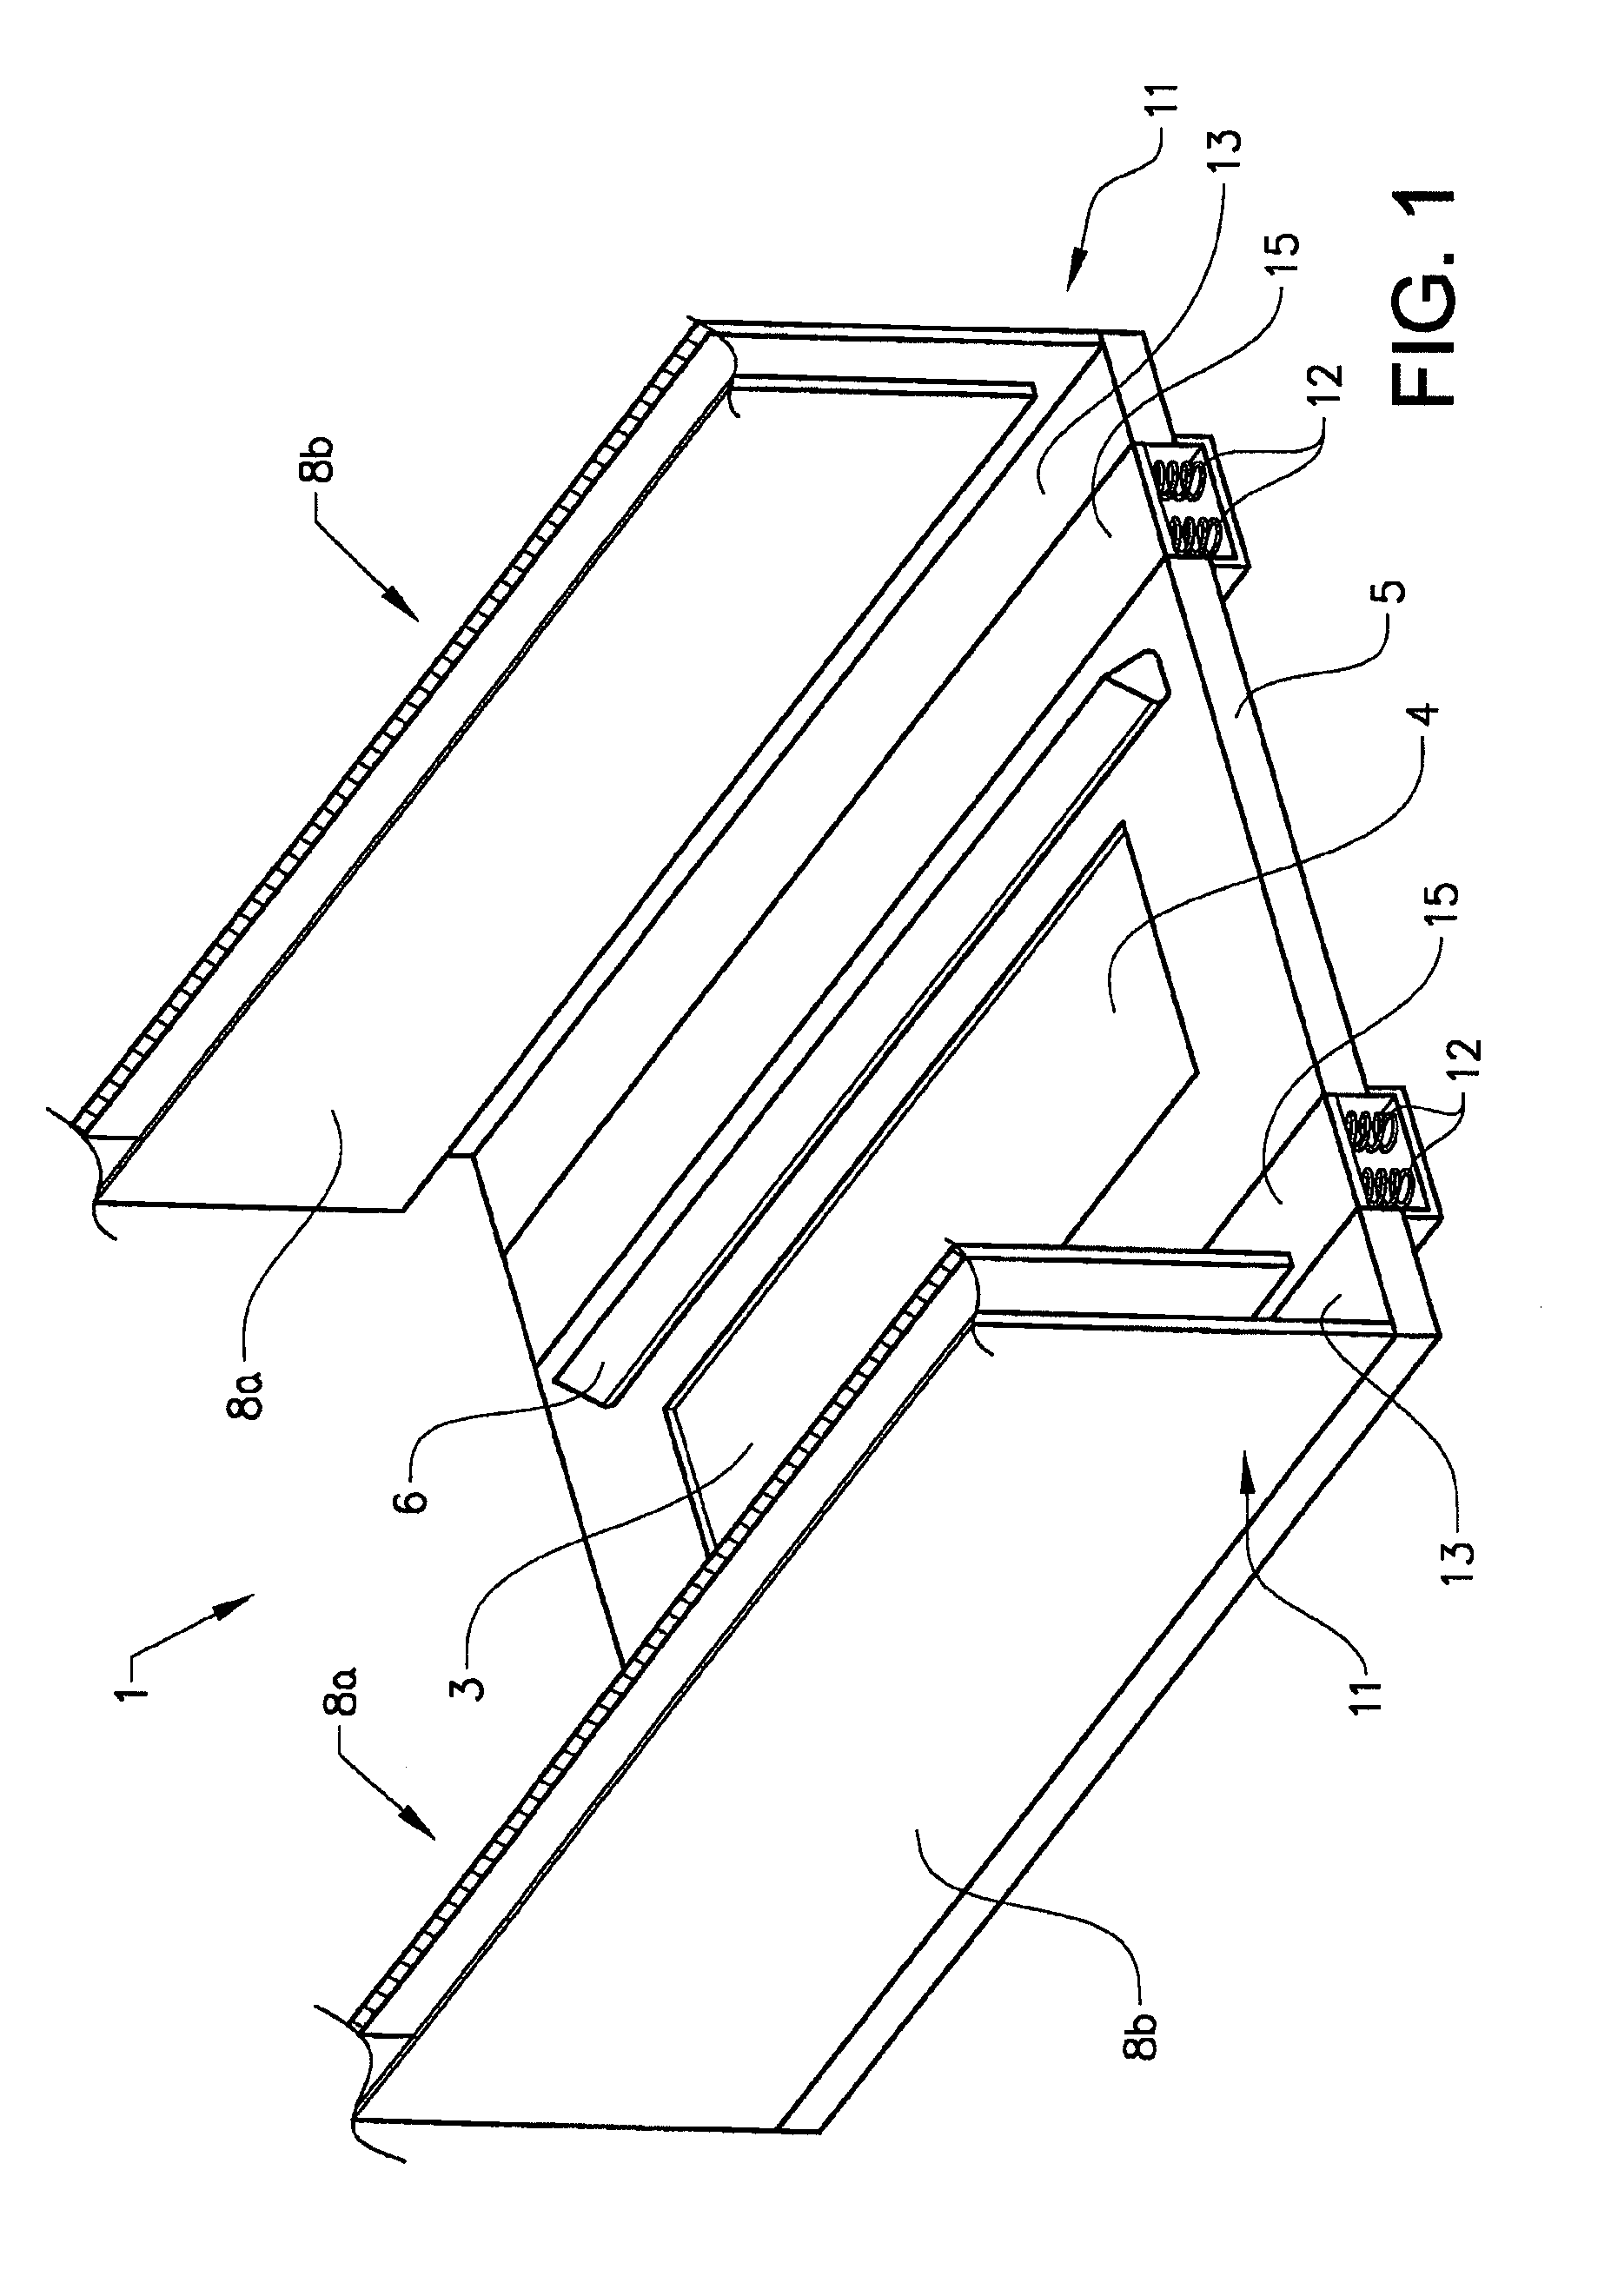 Apparatus for producing a three-dimensional object